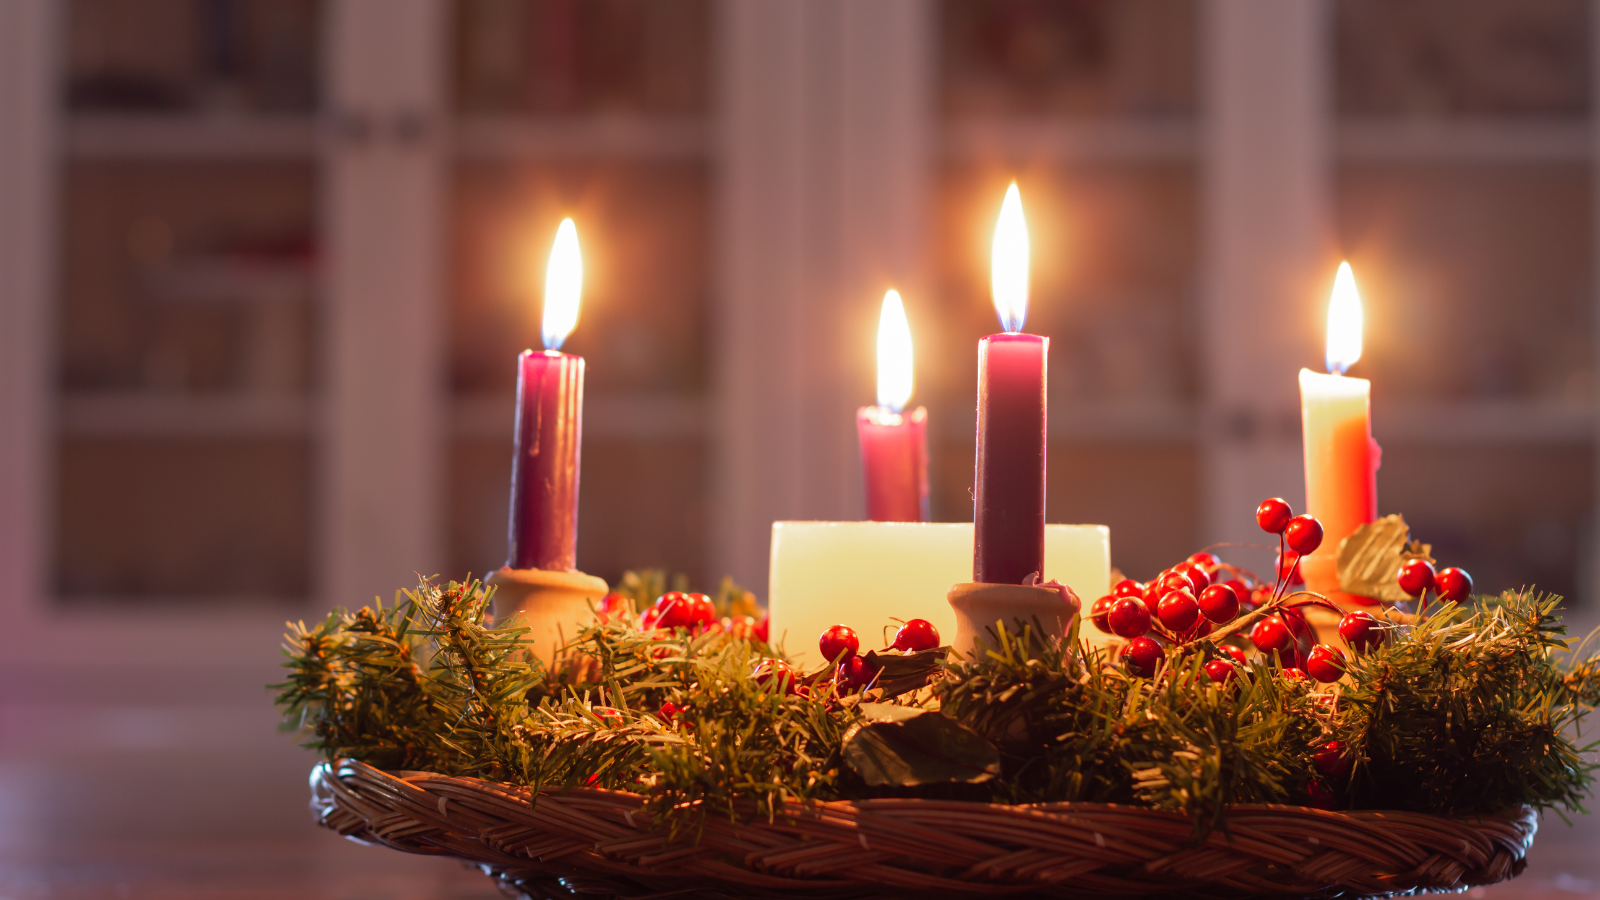 Join Missio for a peaceful, prayerful Advent